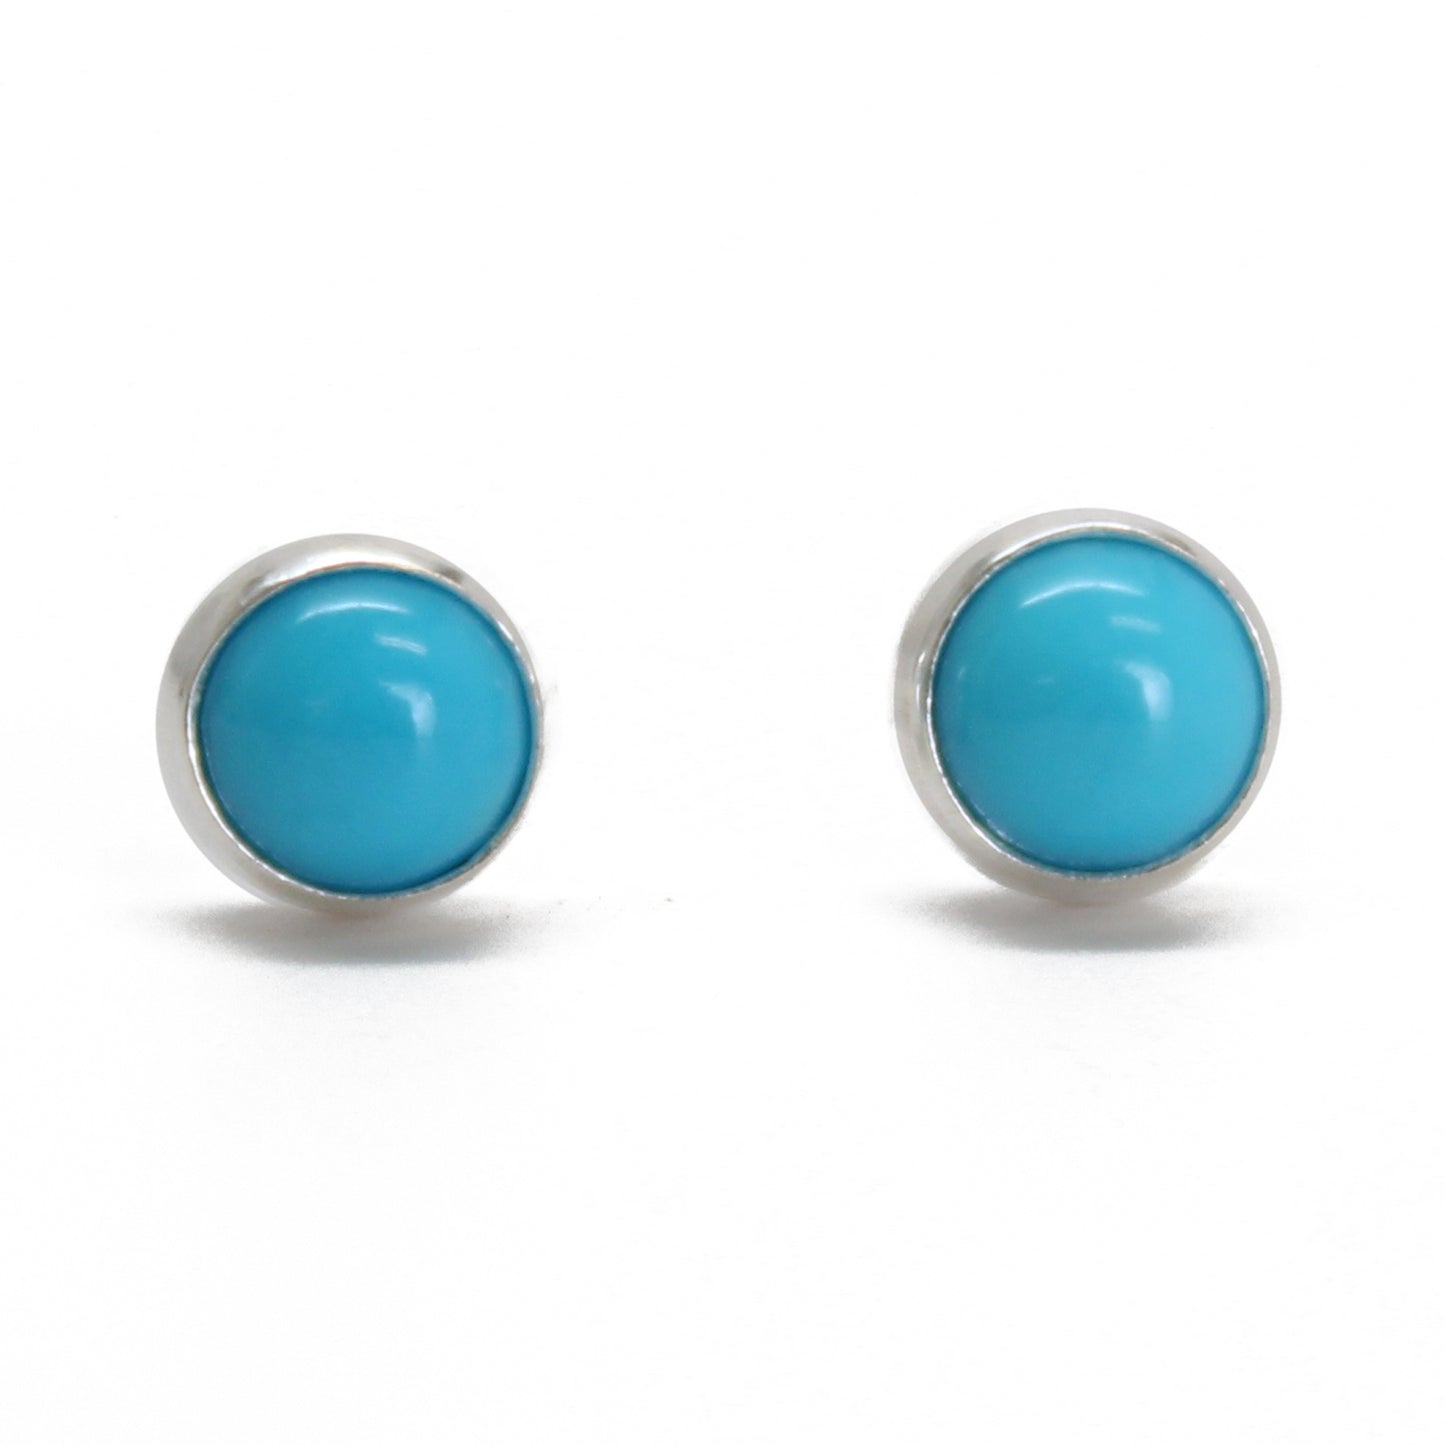 Small O'Keeffe Turquoise Earrings | Turquoise earrings, Earrings, 18 karat  gold earrings